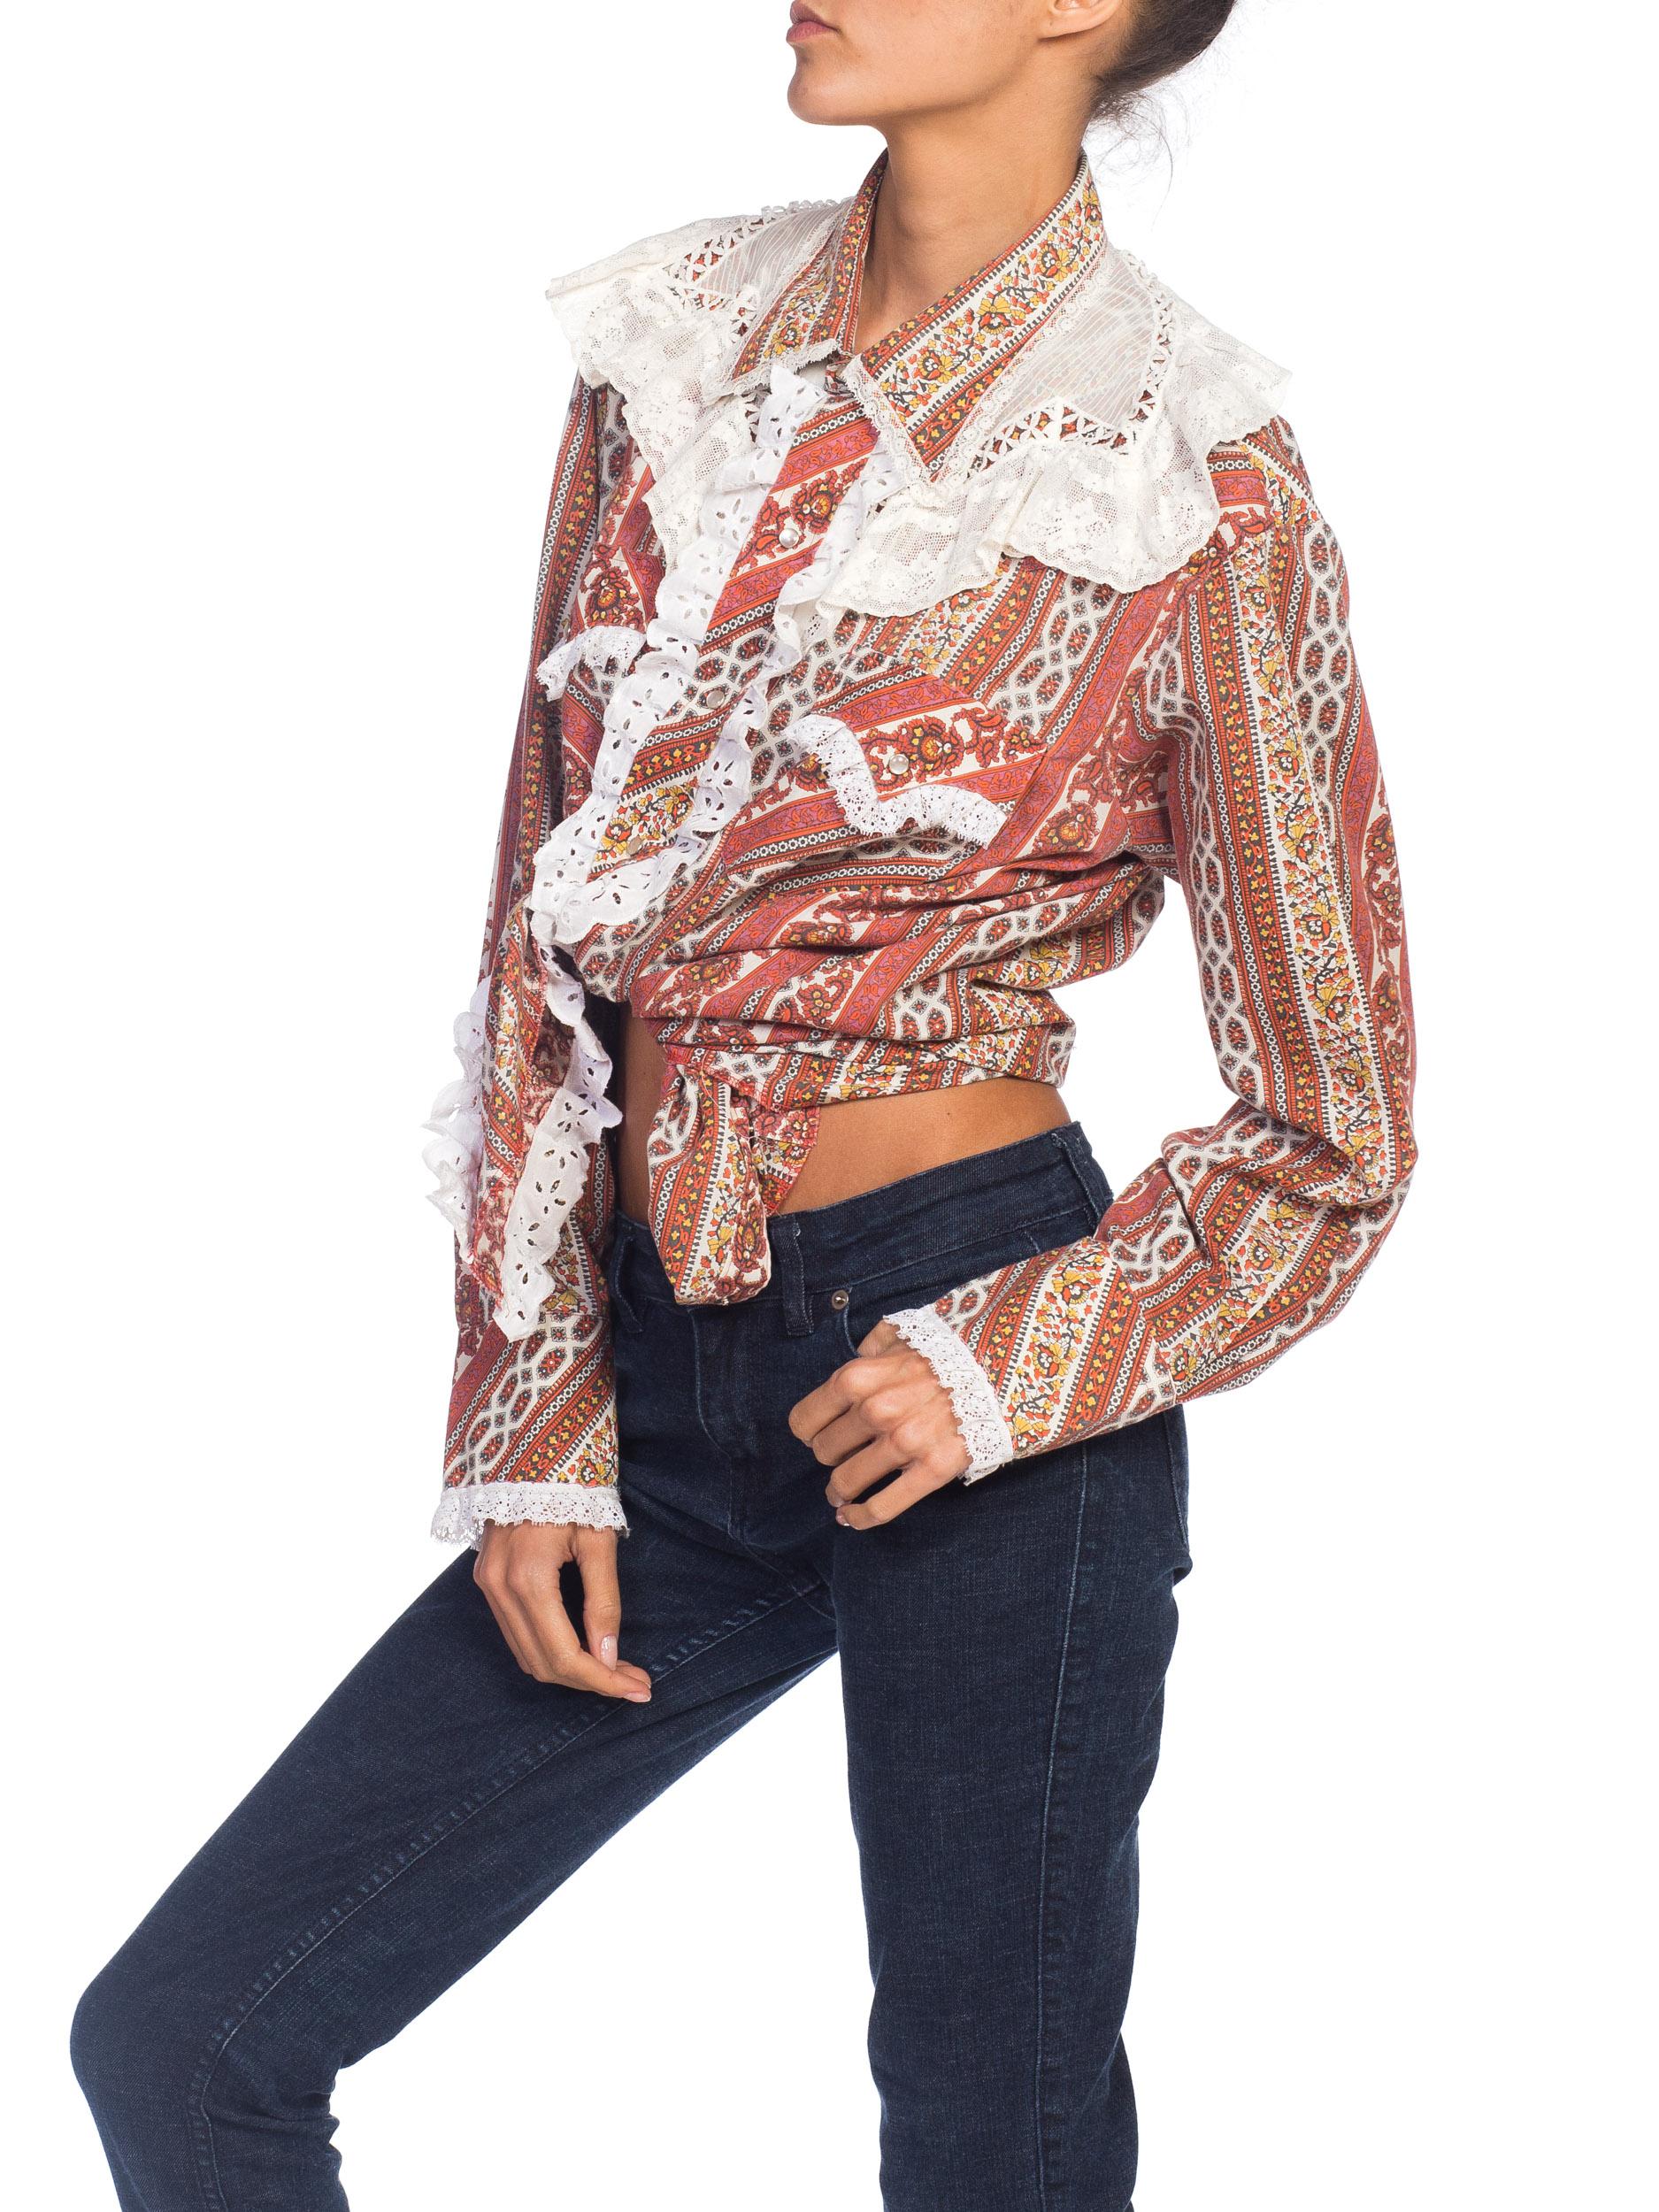 1970s Western Cowgirl Shirt With Vintage Lace Trim  5